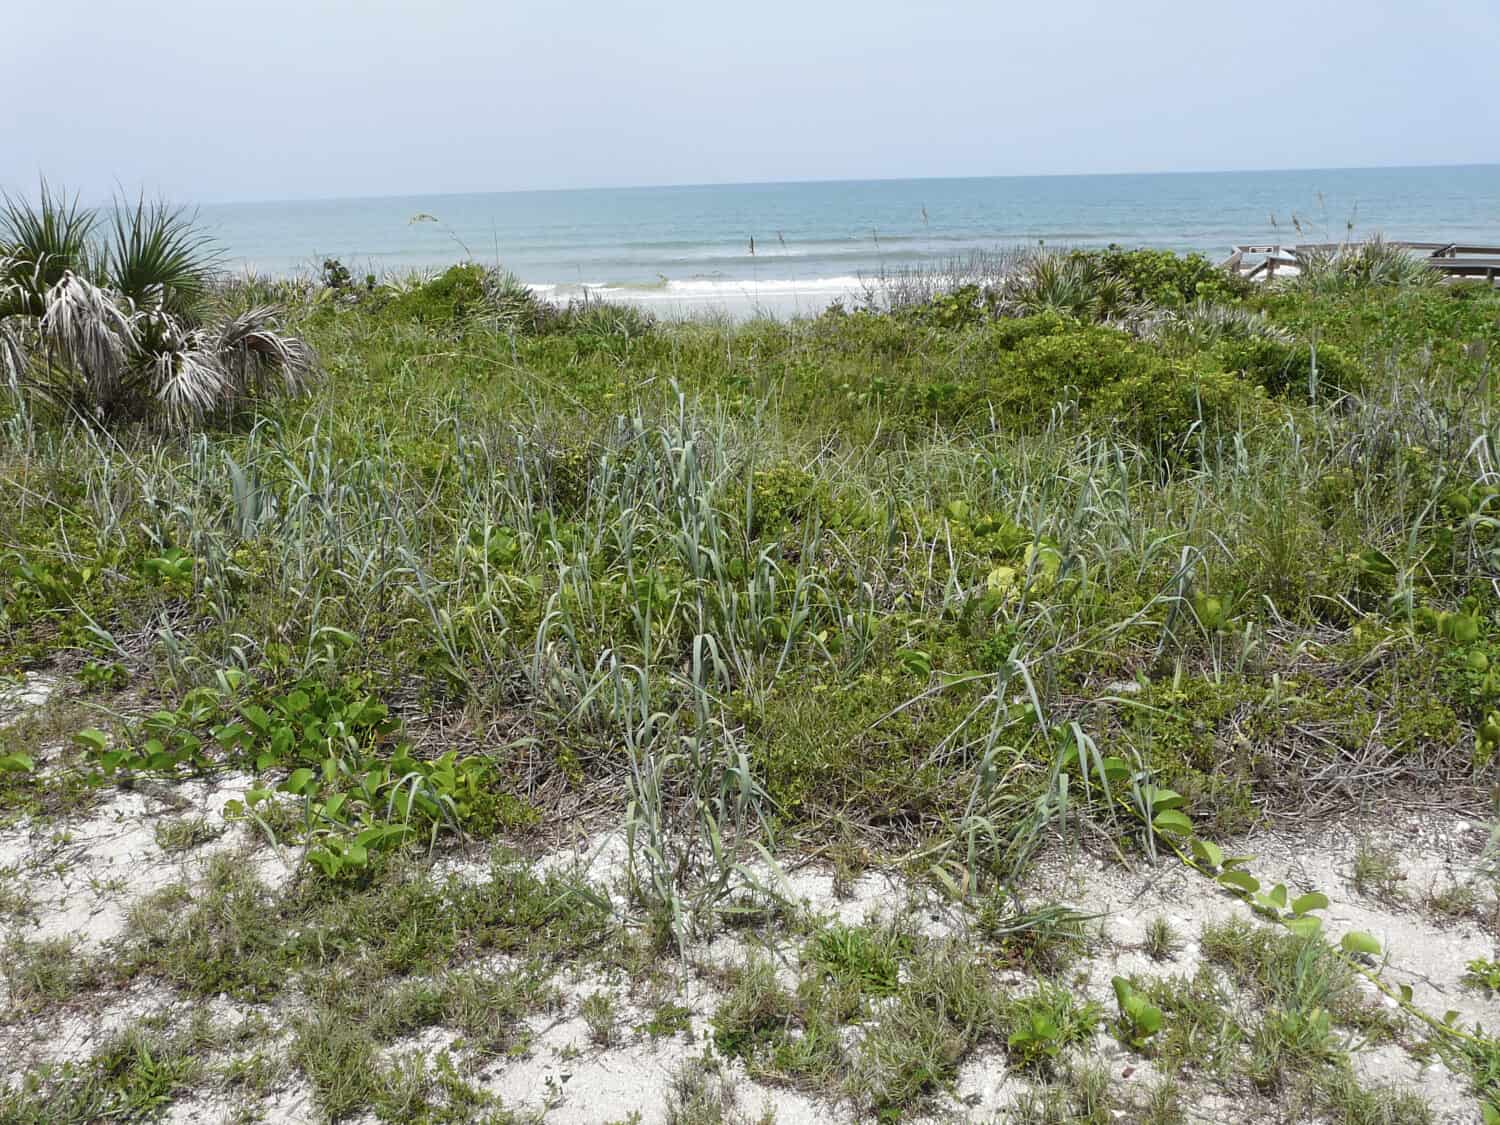 This landscape of Apollo Beach on Florida's Canaveral National Seashore displays a view of the Atlantic Ocean and a variety of coastal vegetation.